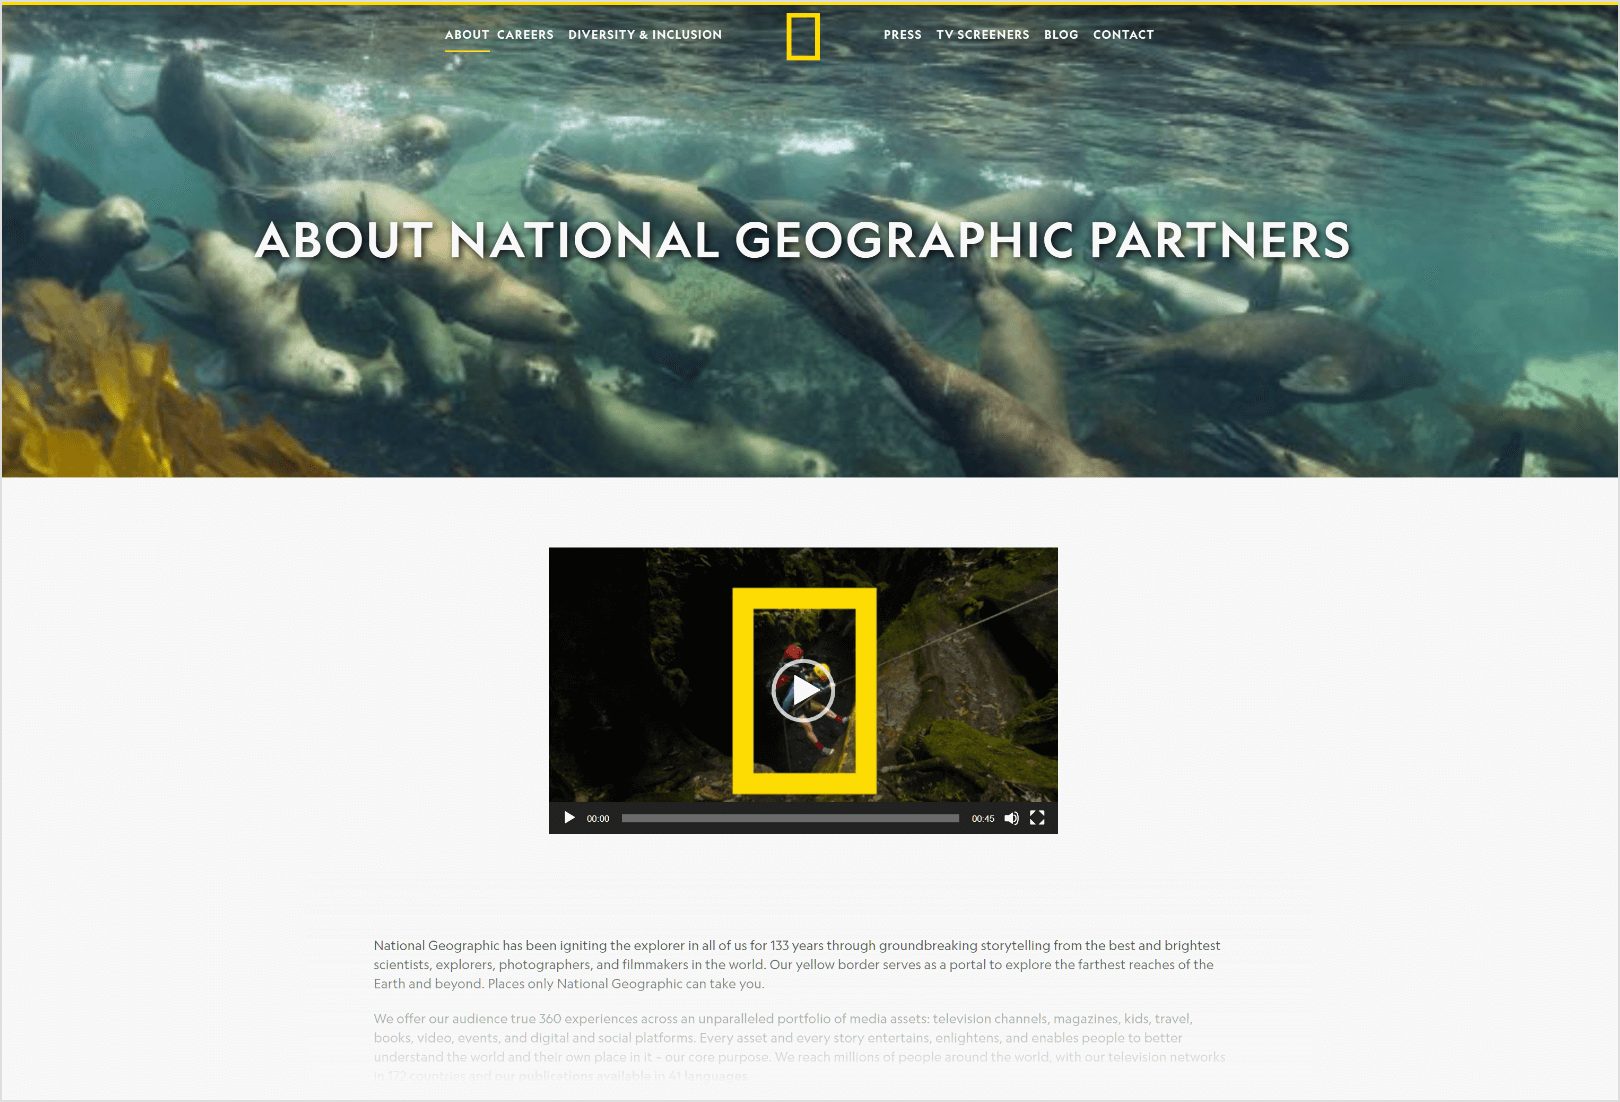 National Geographic About Us Page